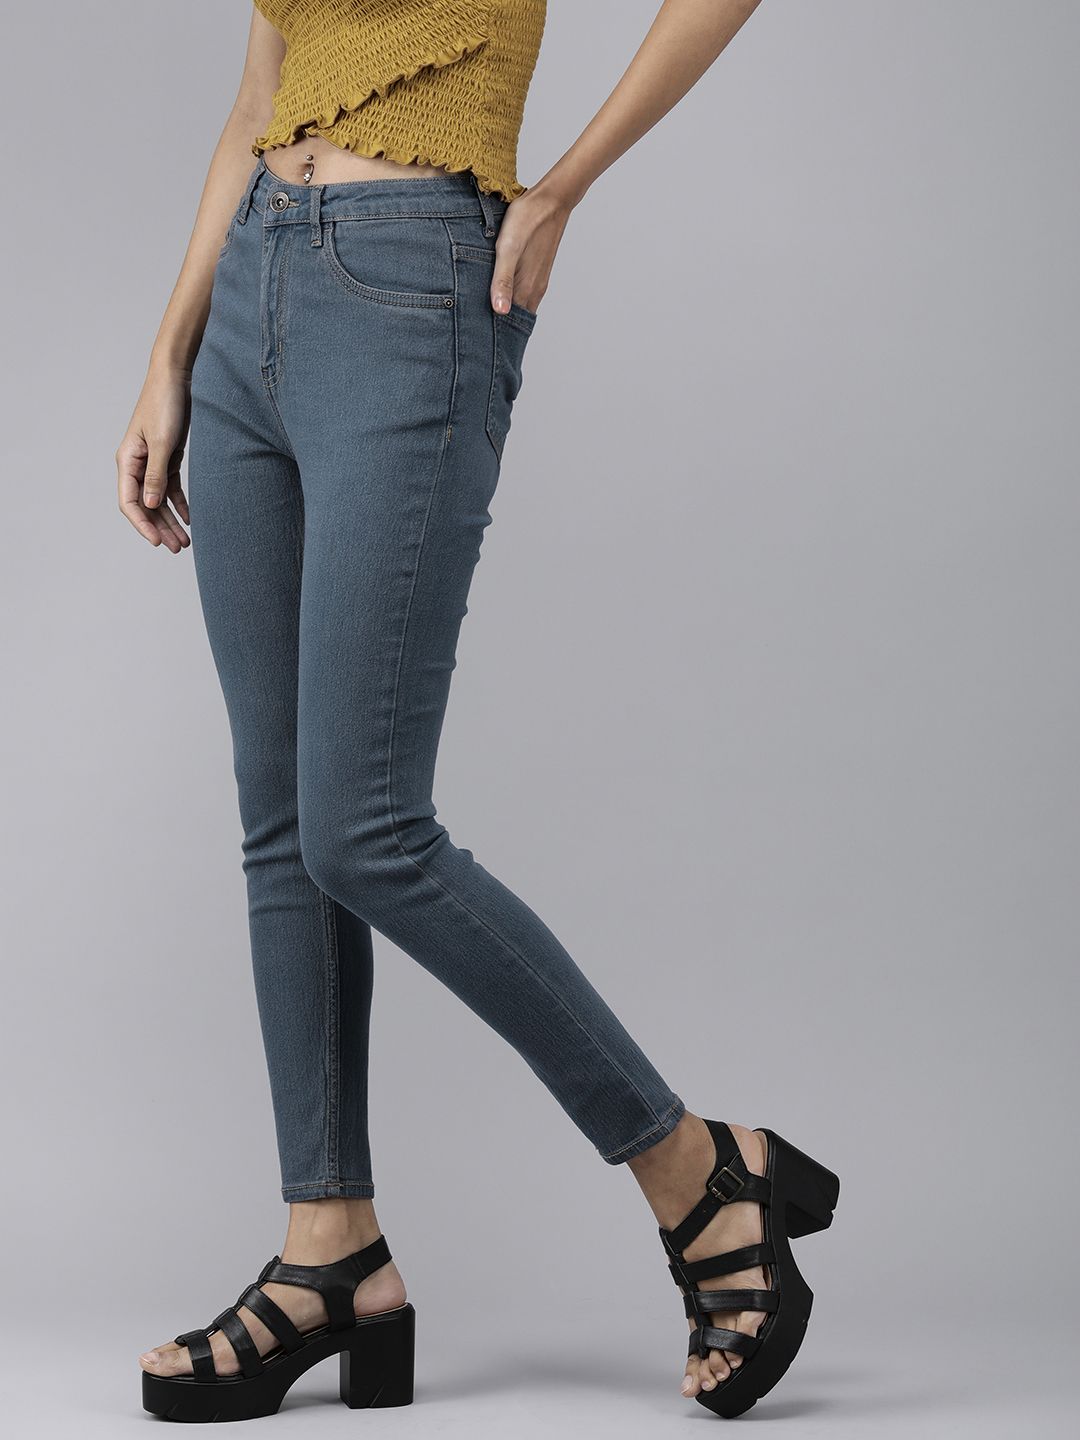 Roadster Women Blue Super Skinny Fit Stretchable Jeans Price in India